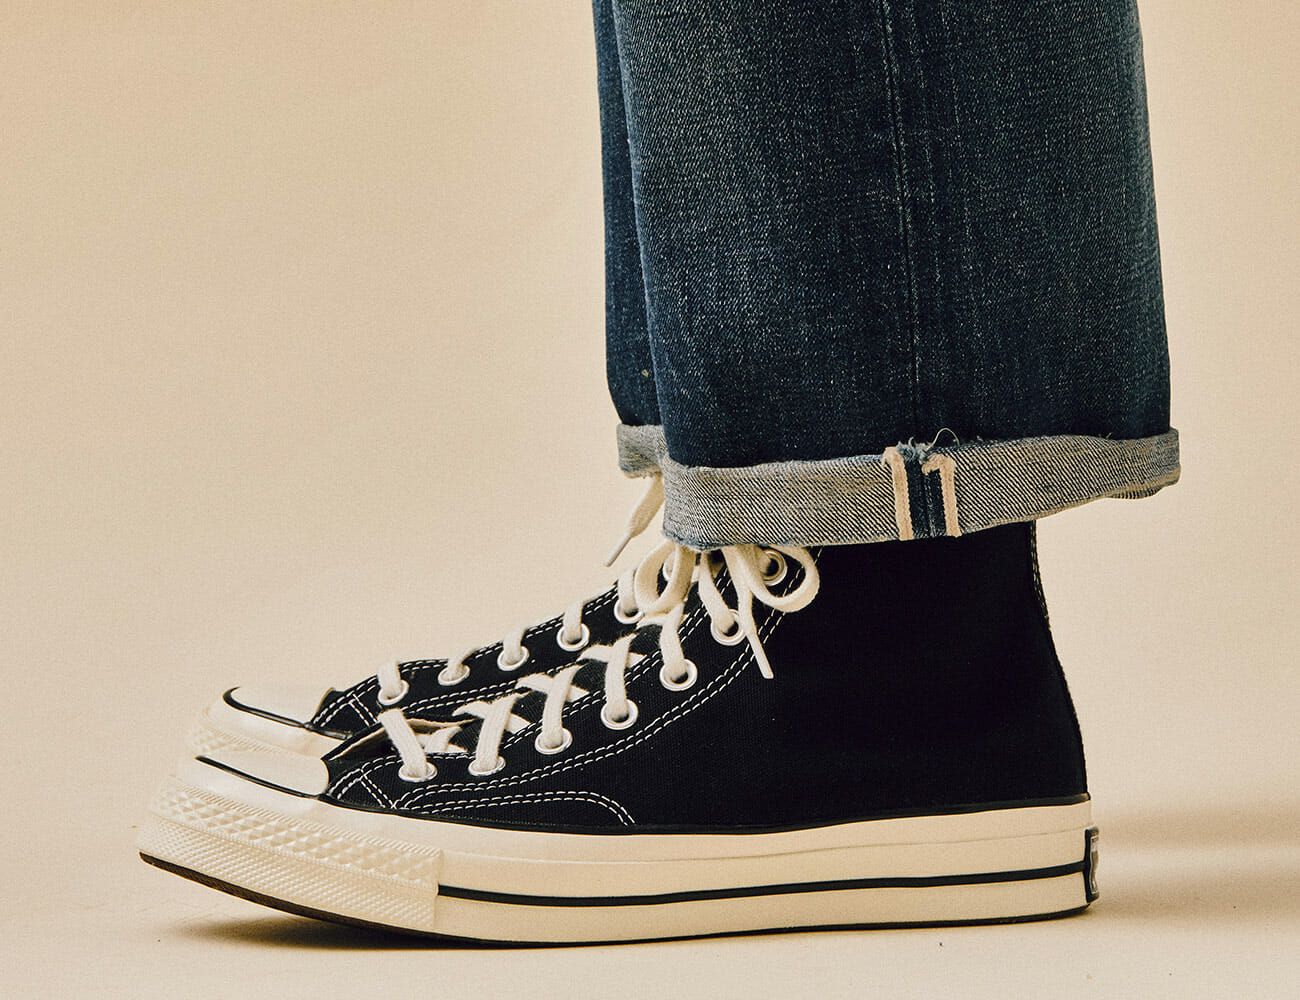 difference between converse 70s and normal